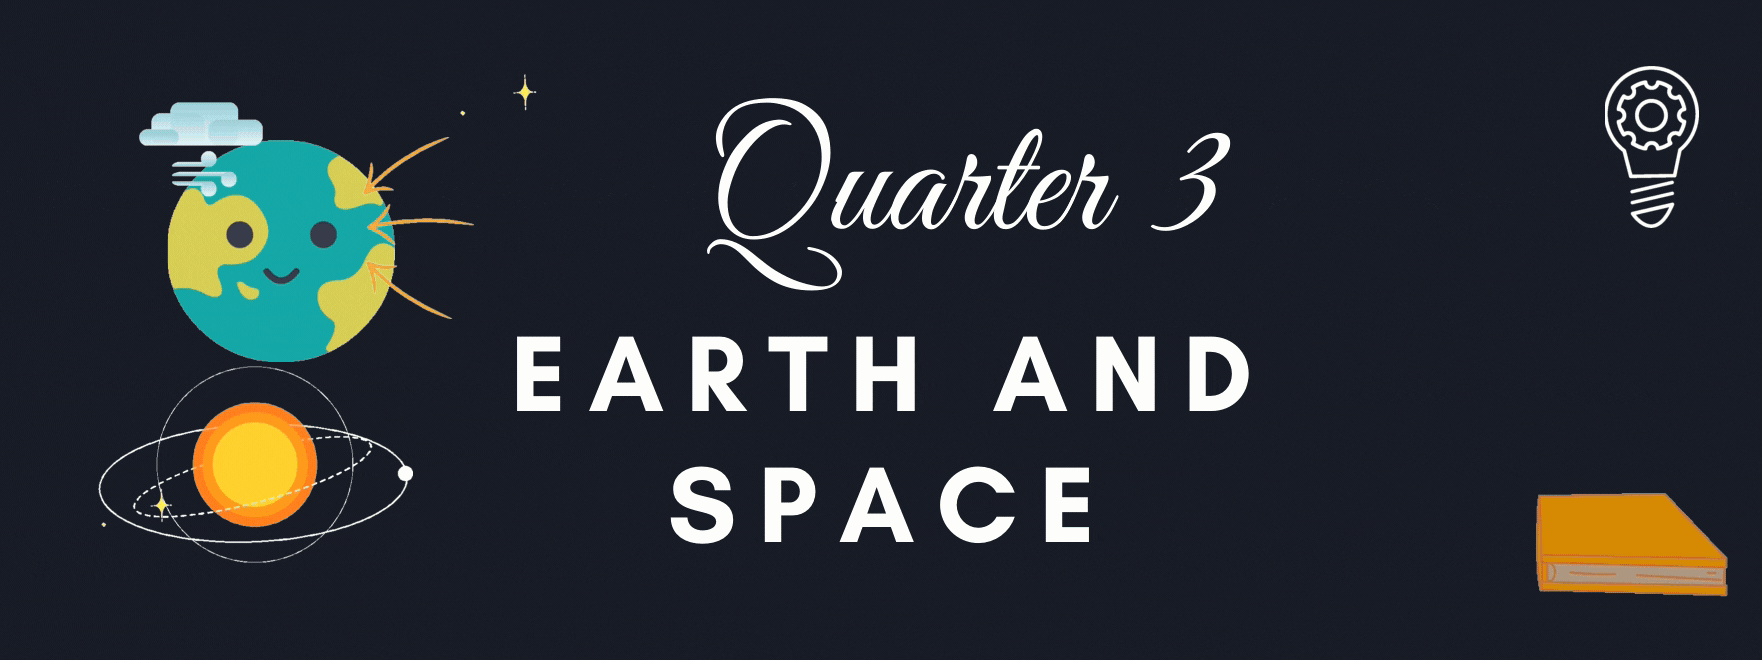 G9 - Science Quarter 3 EARTH AND SPACE 